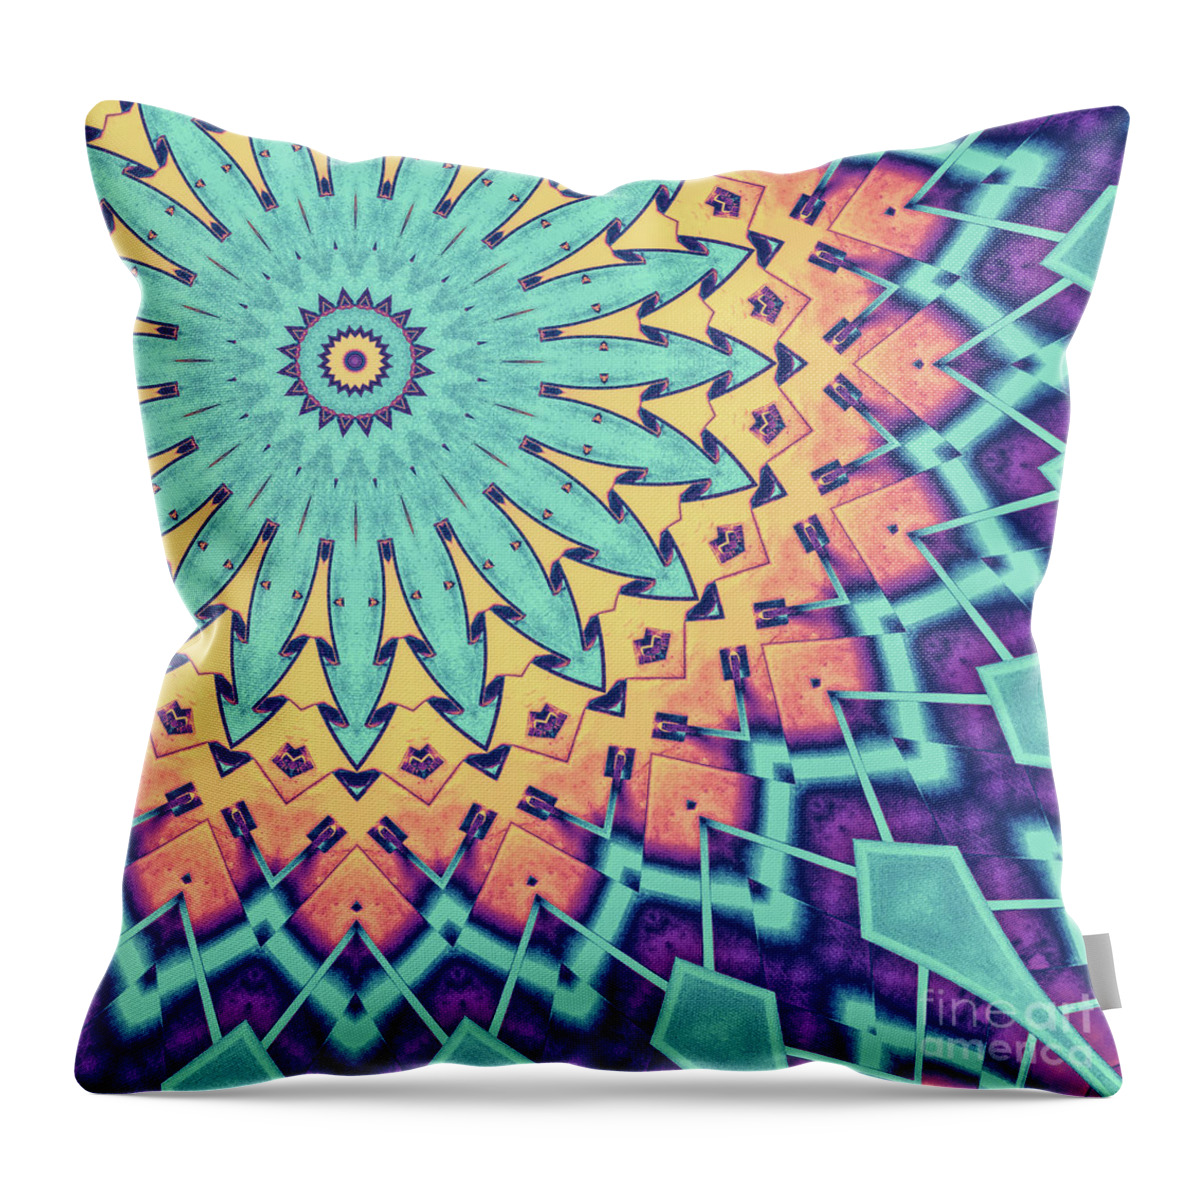 Turquoise Throw Pillow featuring the digital art Turquoise Abstract by Phil Perkins